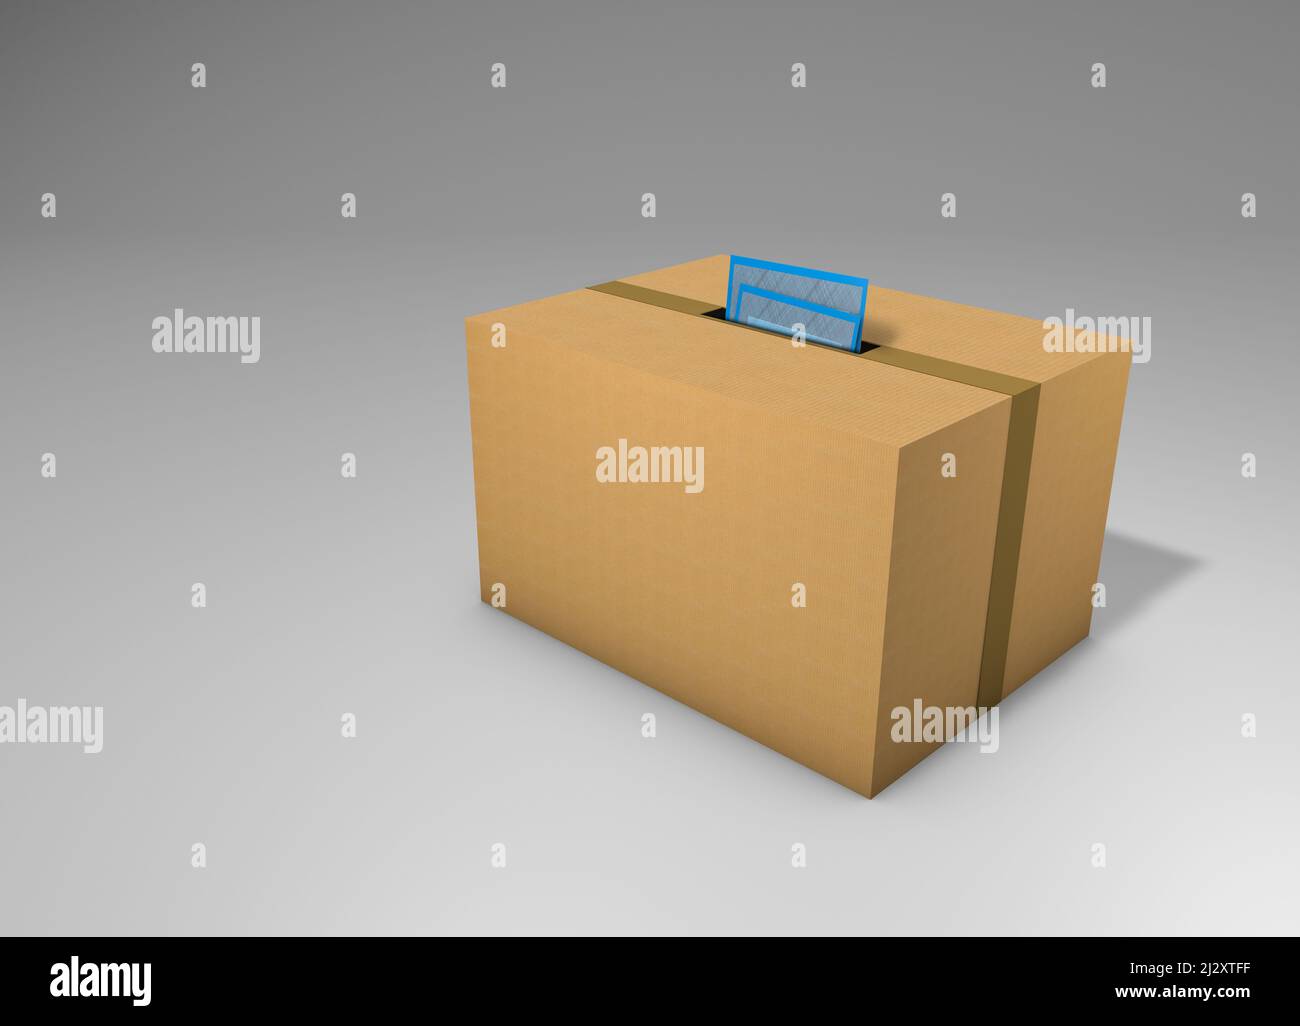 3D rendering of cardboard box as an urn for inserting ballot papers for voters for election day Stock Photo